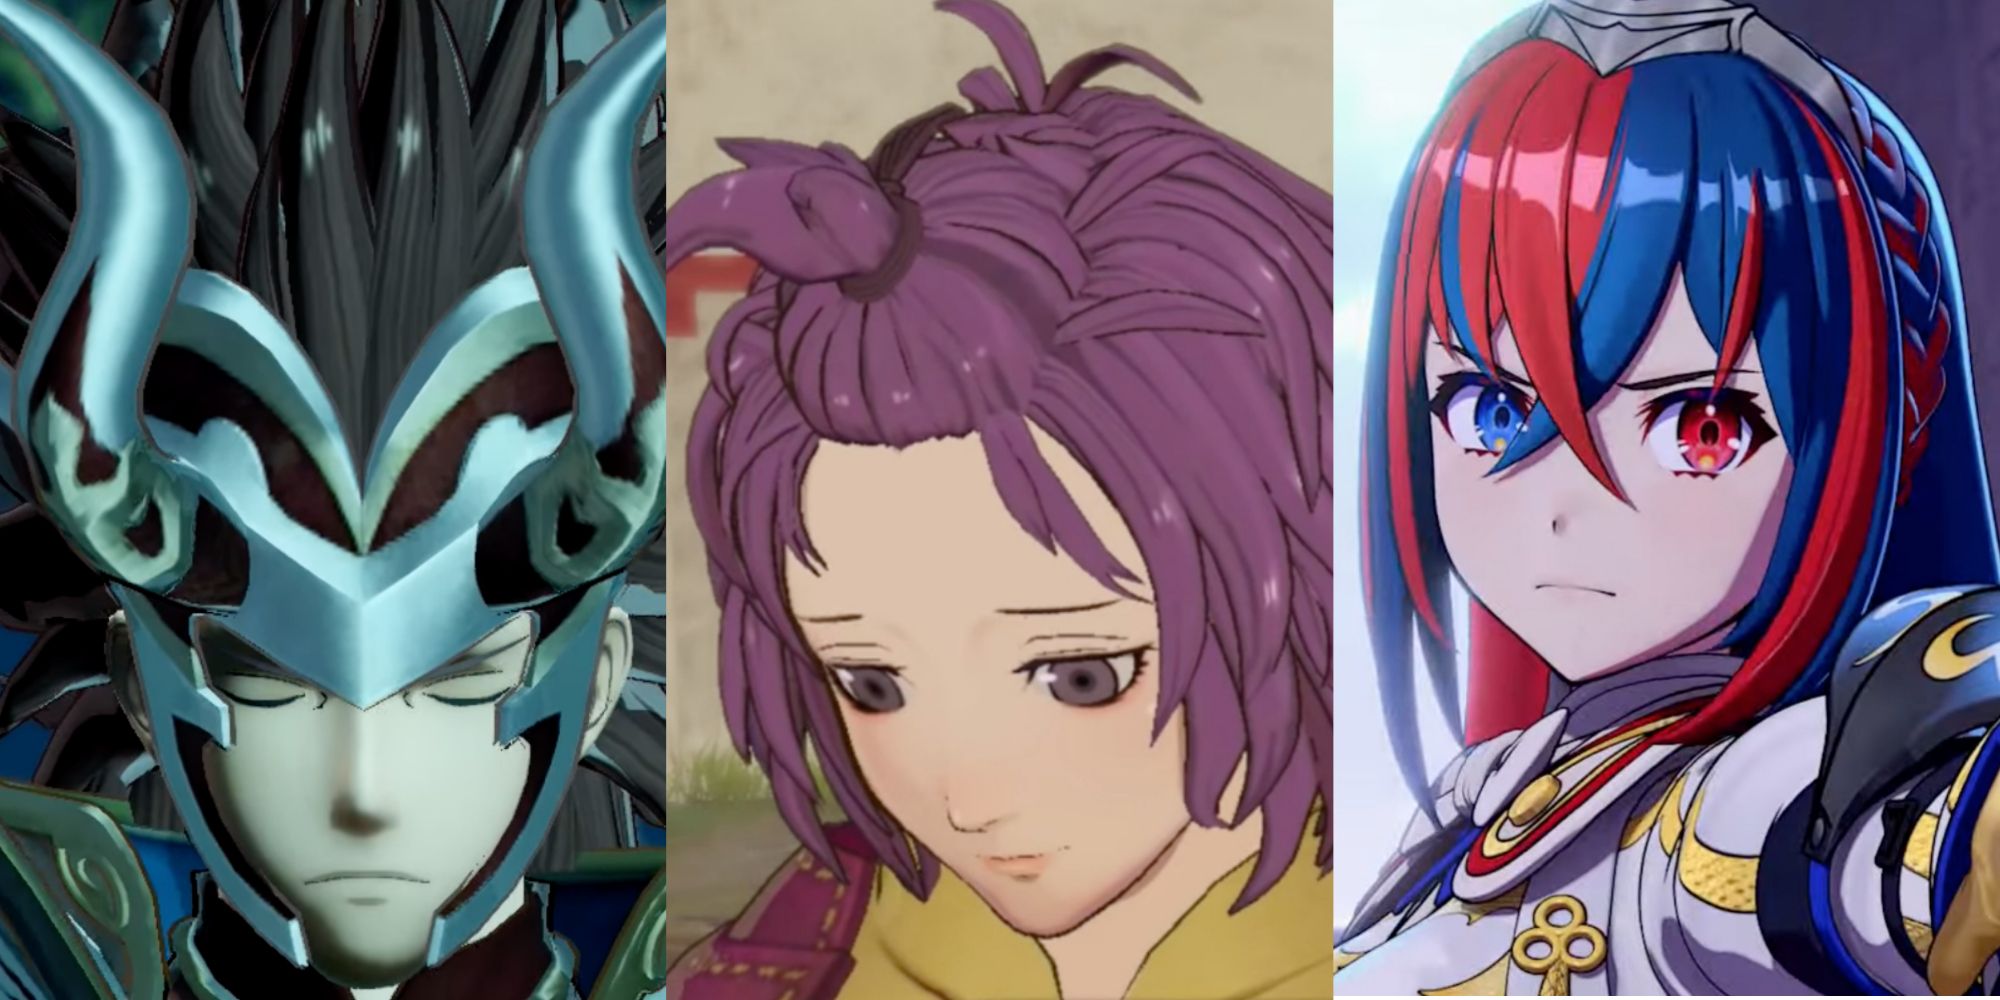 Anime Hairstyles in Real Life